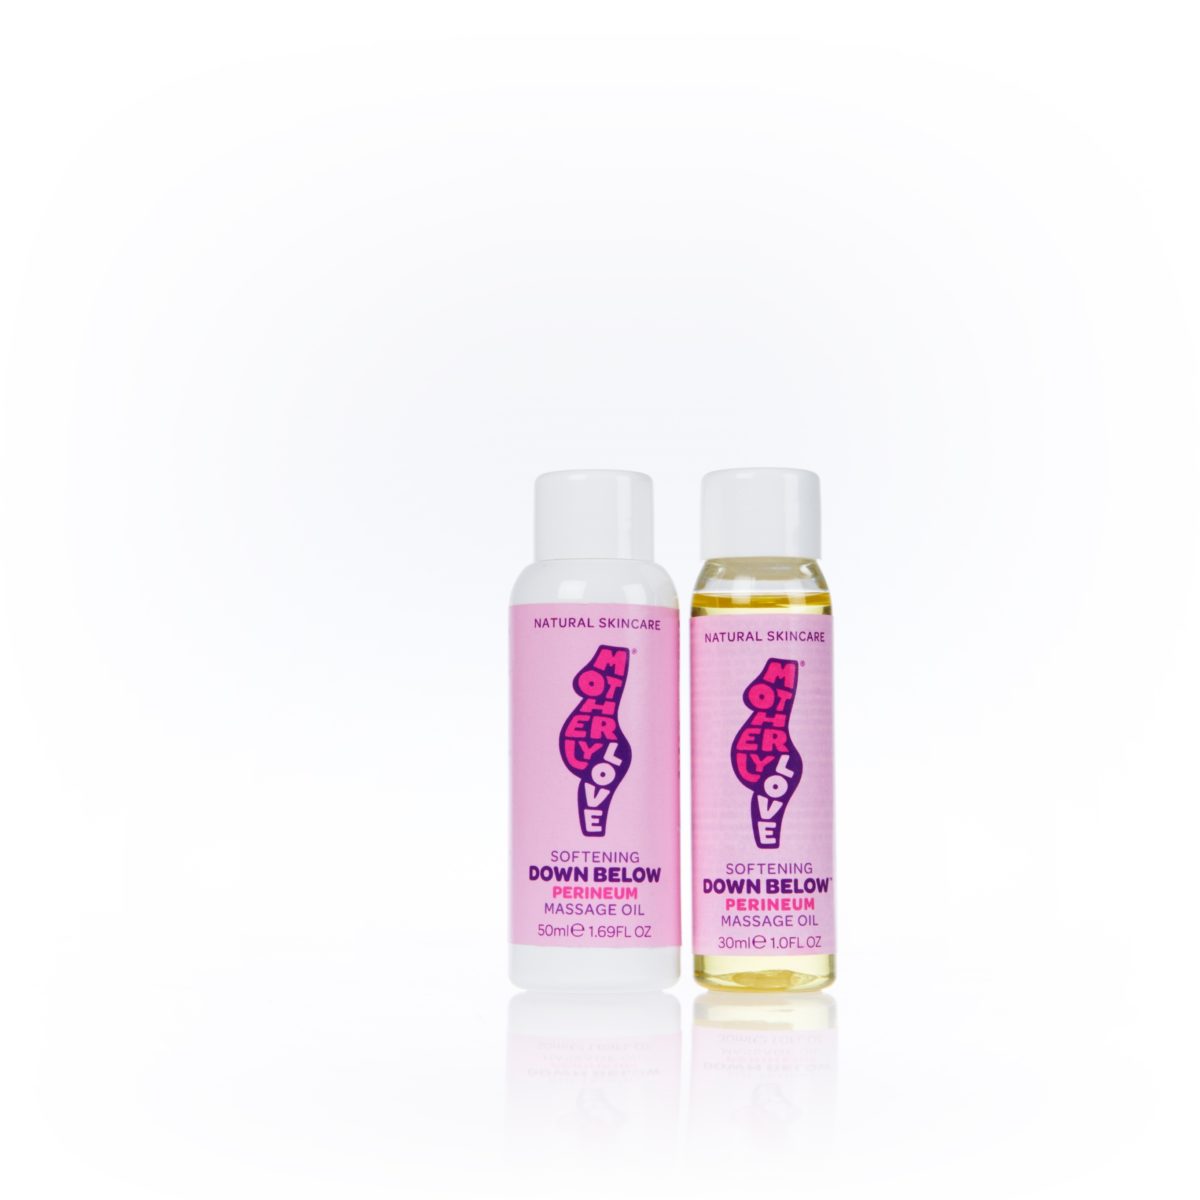 Down below in 2 sizes for perineal massage